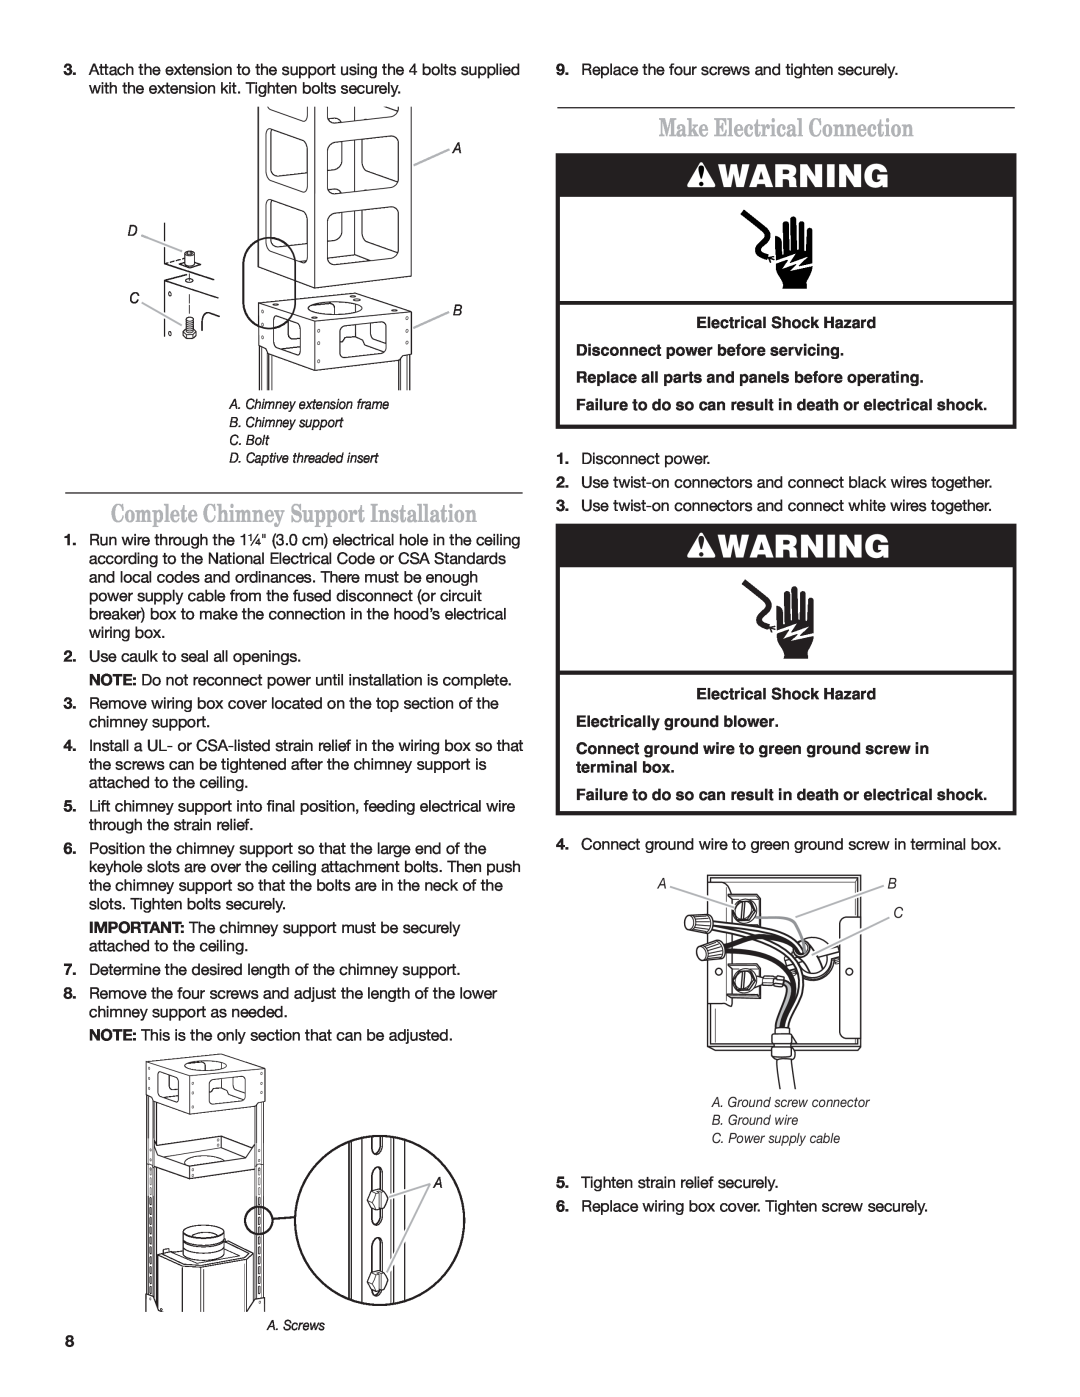 KitchenAid 9763382 Complete Chimney Support Installation, Make Electrical Connection, Tighten strain relief securely 